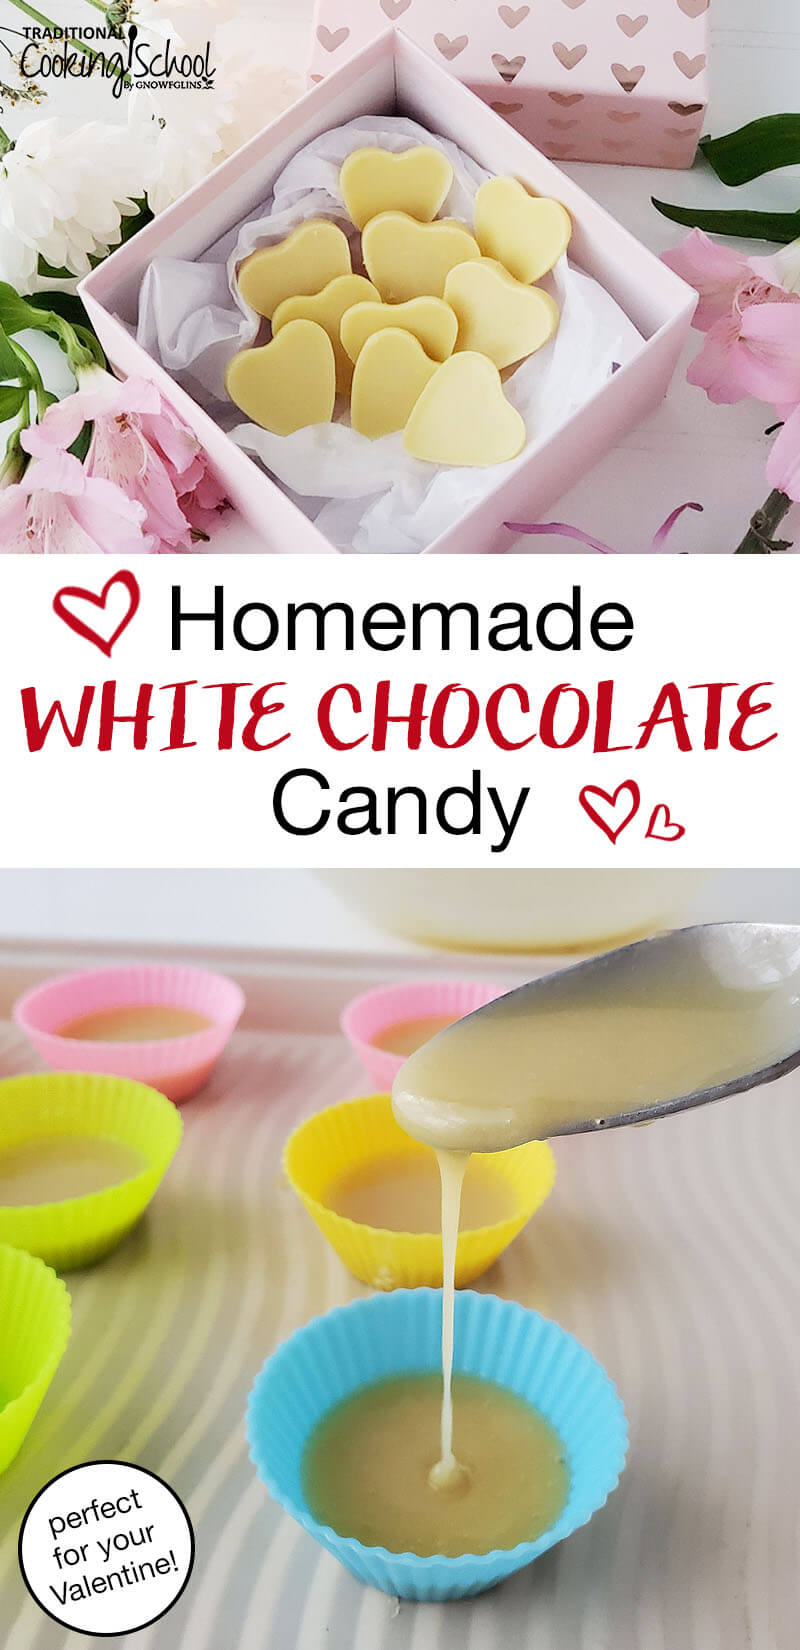 photo collage of making homemade candy, including pouring it into molds, and heart-shaped candies arrayed in a decorative box, with text overlay: "Homemade White Chocolate Candy (perfect for your Valentine!)"